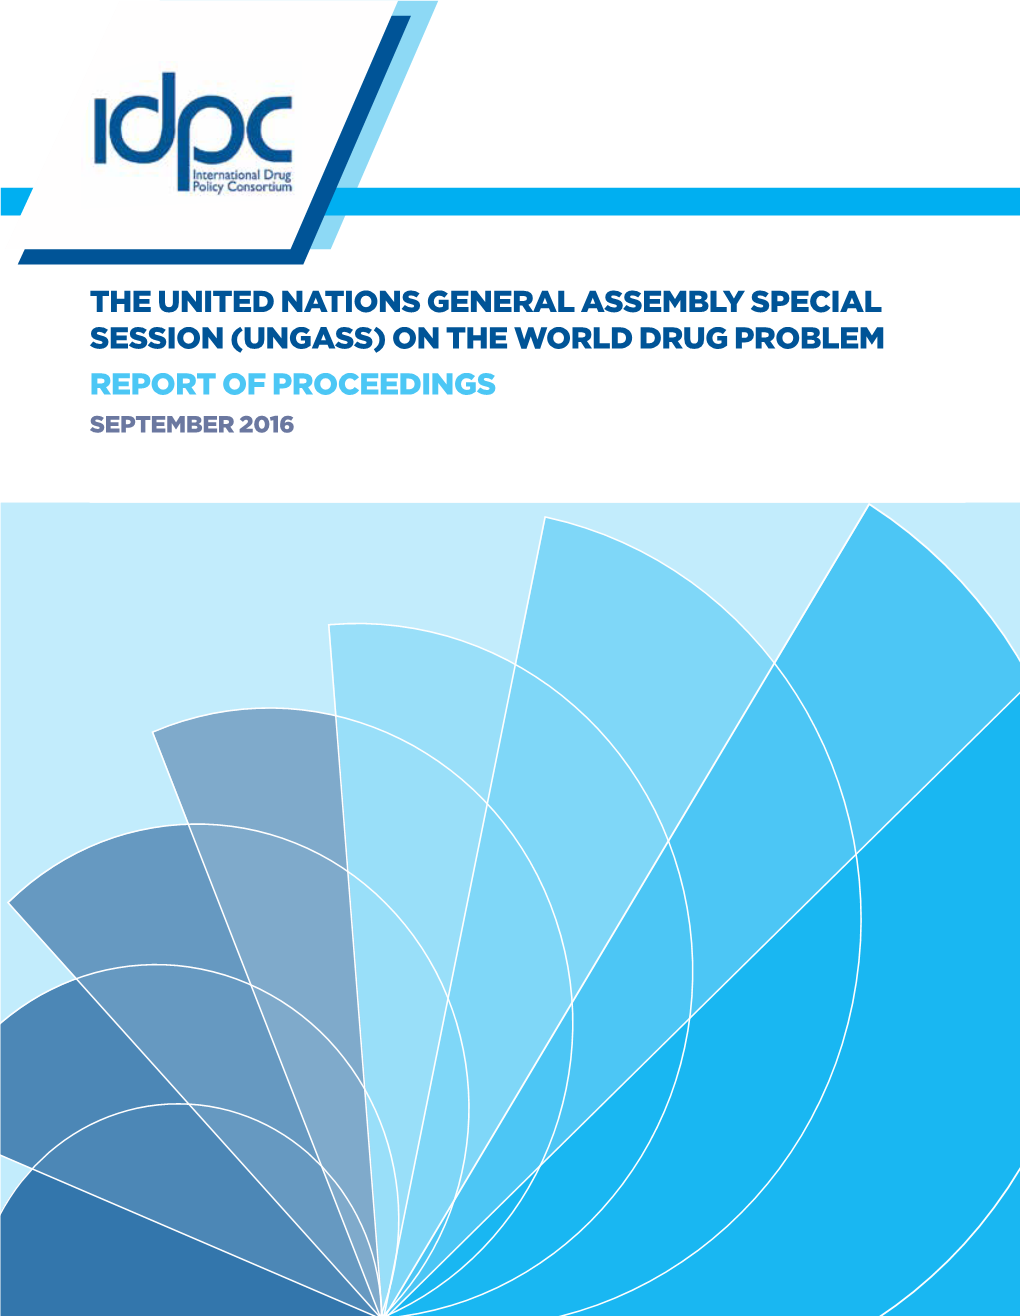 UNGASS) on the WORLD DRUG PROBLEM Funded, in Part, By: REPORT of PROCEEDINGS SEPTEMBER 2016 Introduction